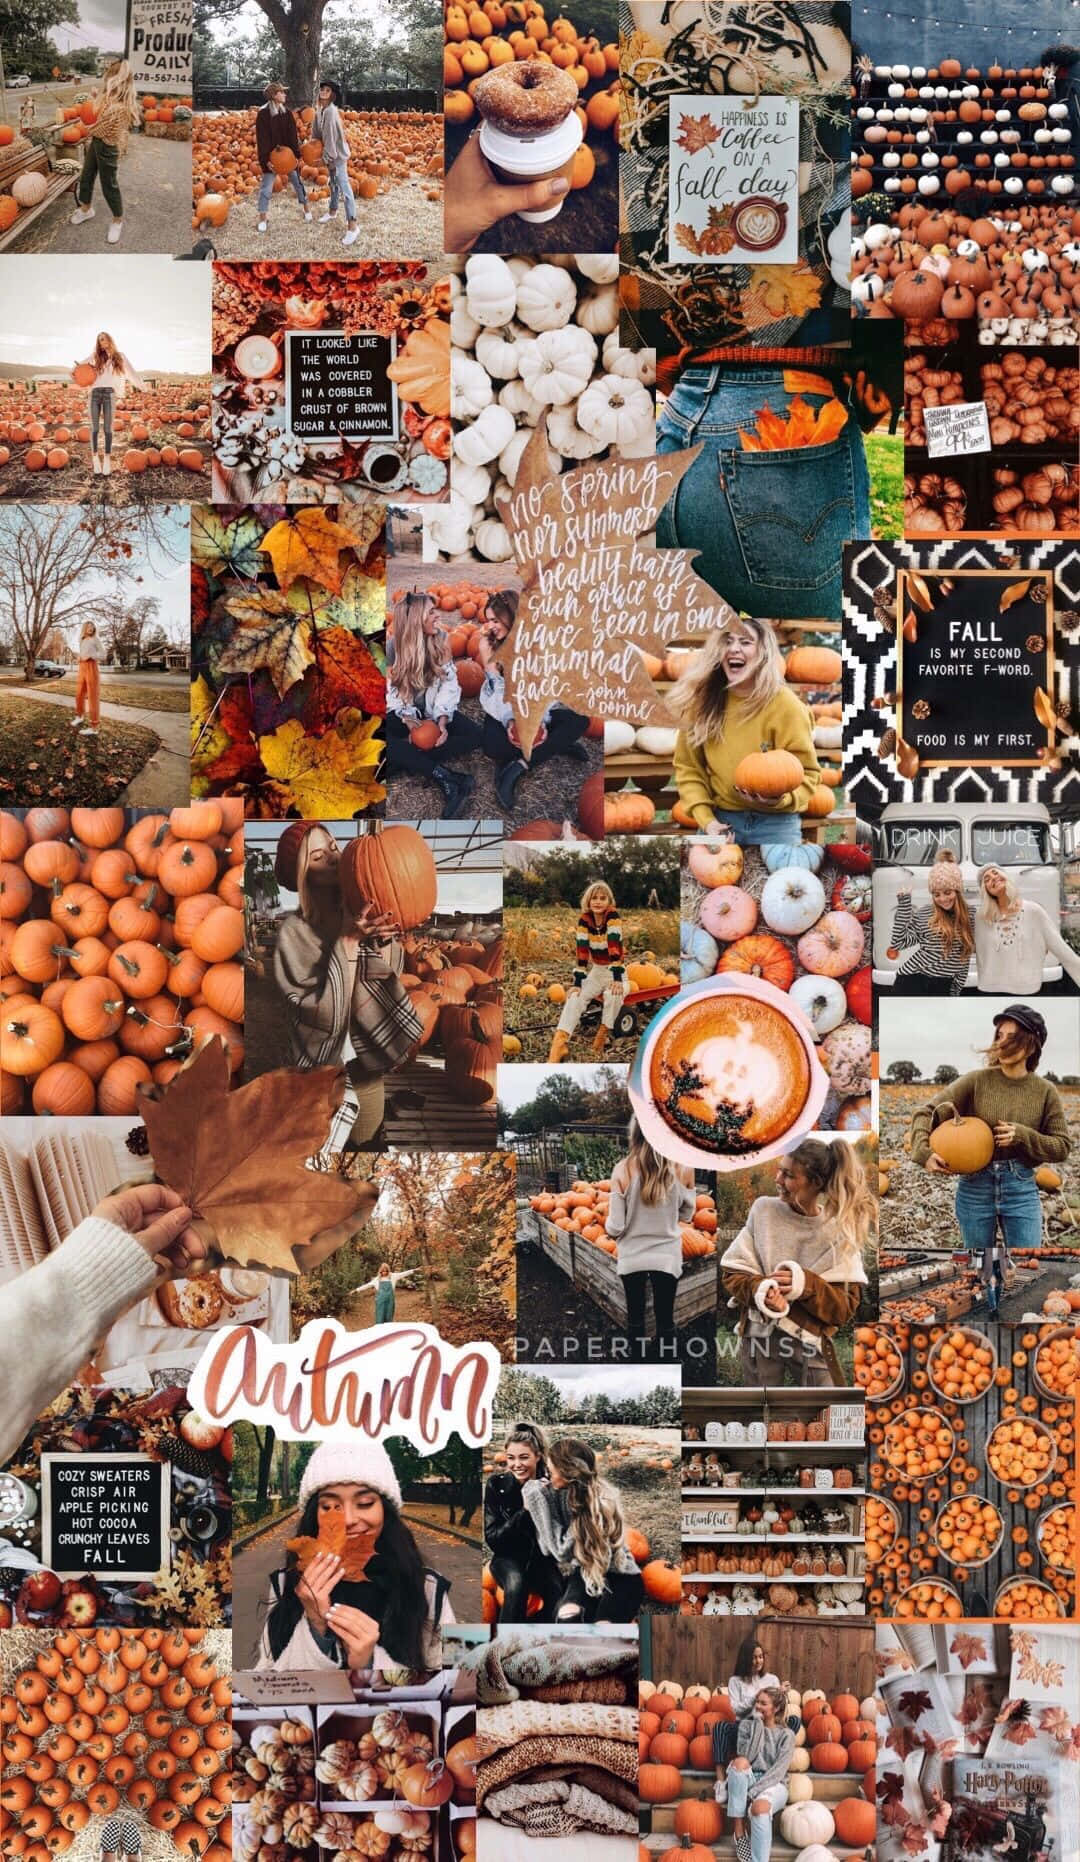 Make the most of this fall season by trying something new! Wallpaper